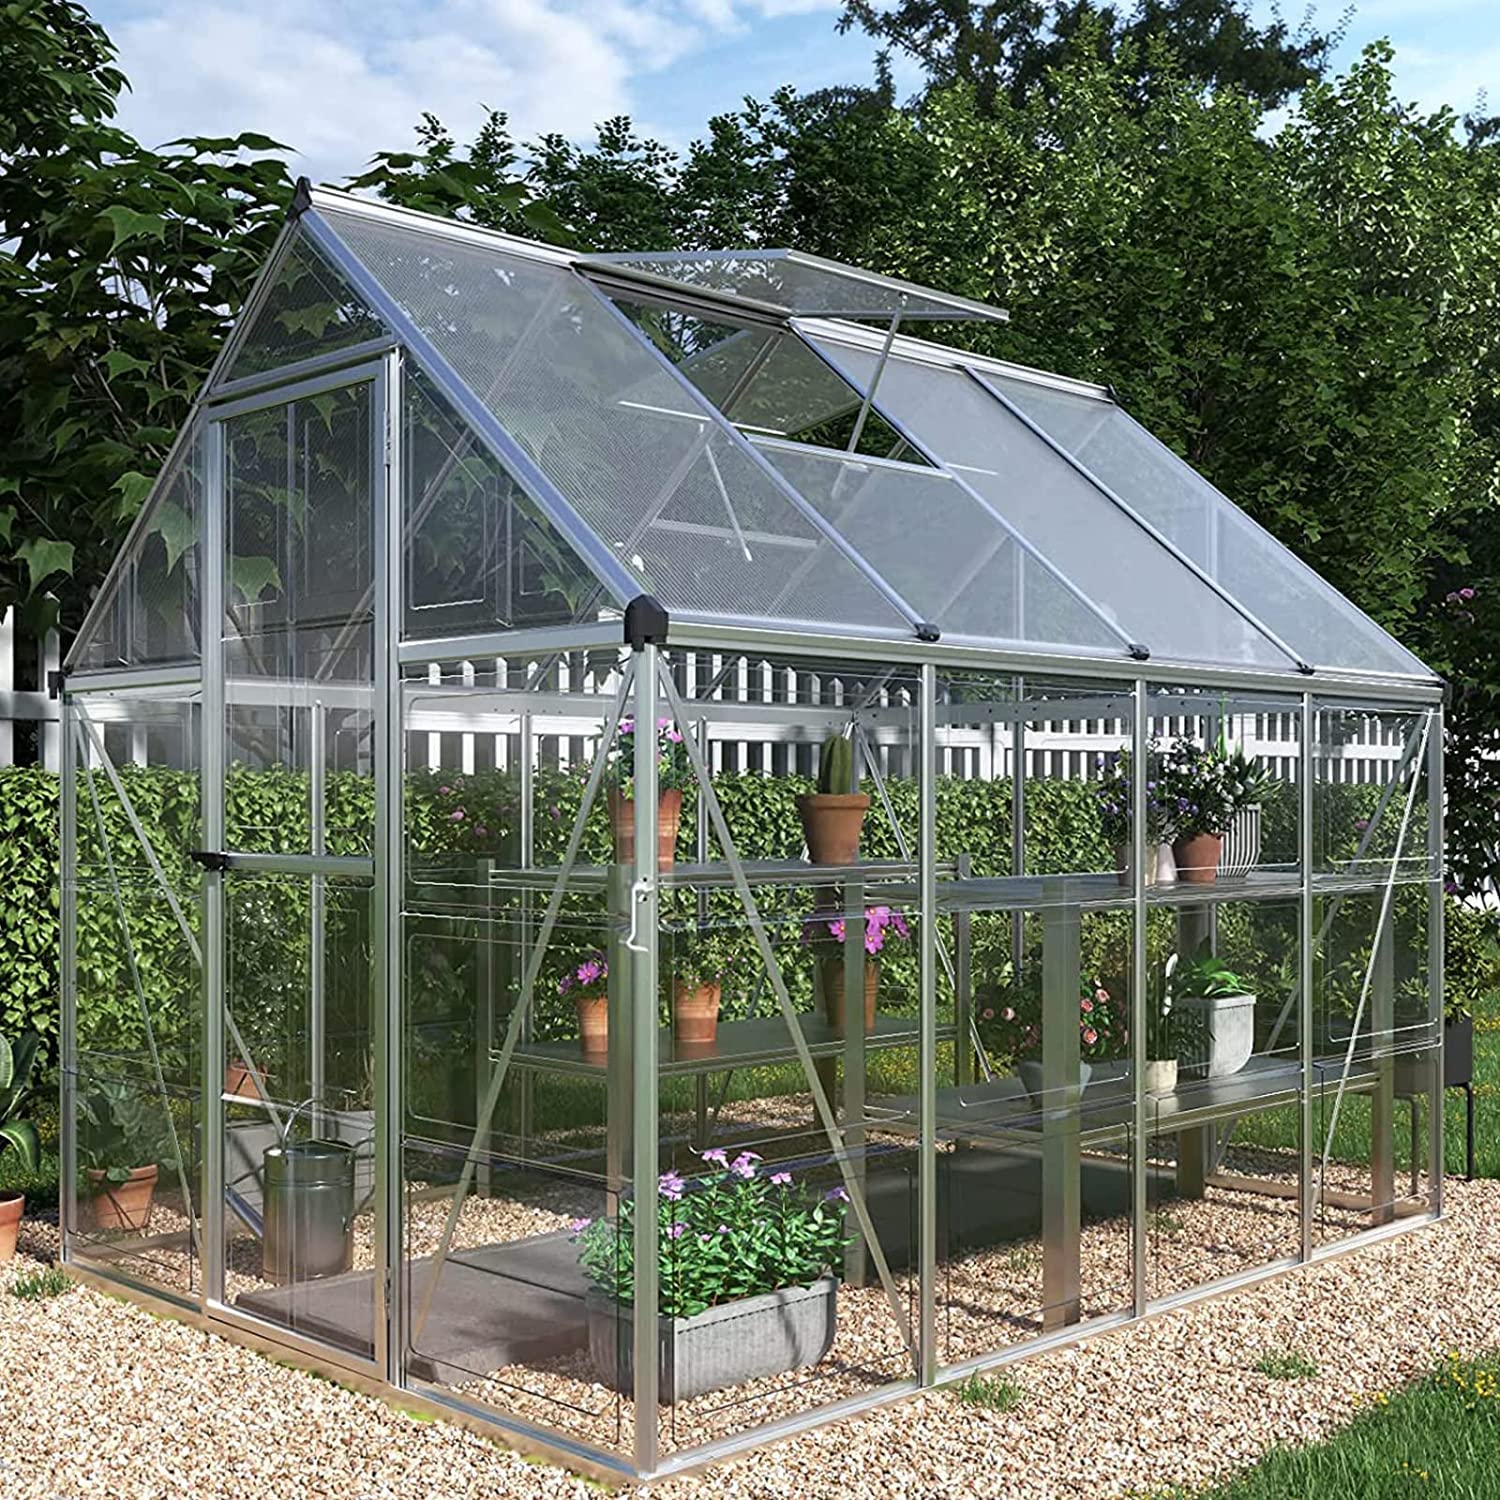 【Home&Garden】6x8 FT Hybrid Polycarbonate Greenhouse 2 Vent Window with ...